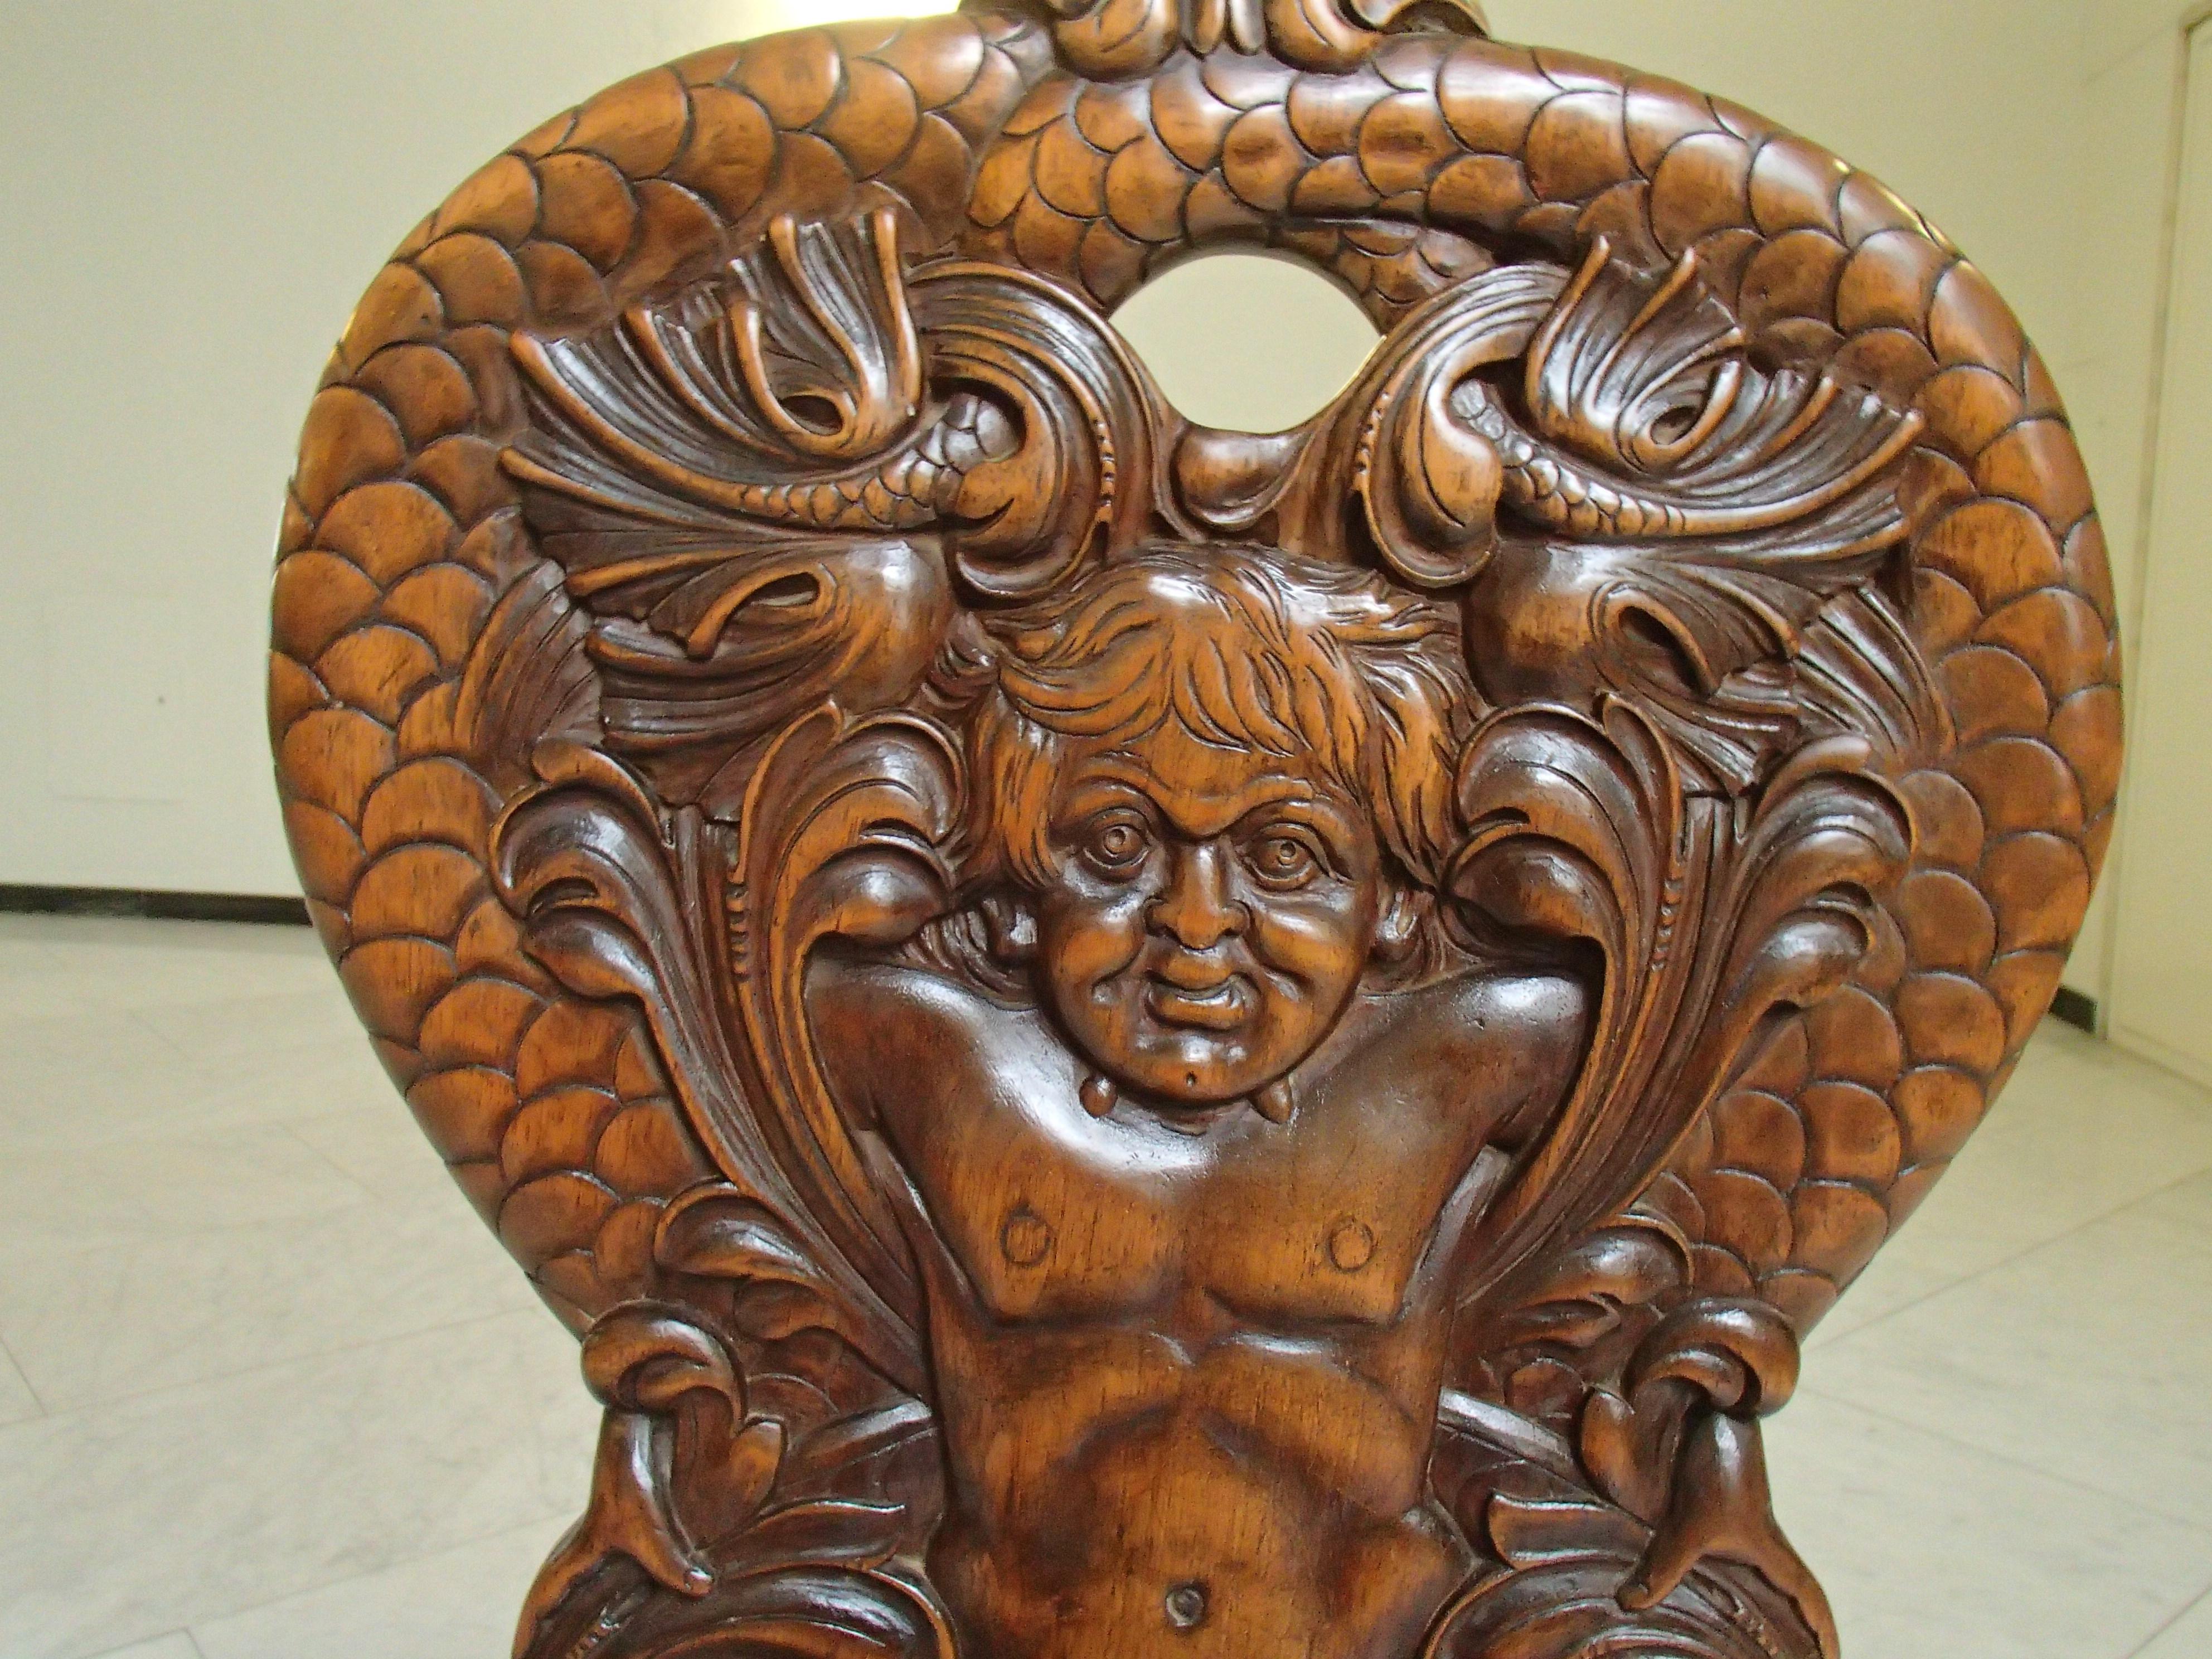 Pair of Brutalist Wooden Chairs Carved with Fabulous Creatures - Dragons 5